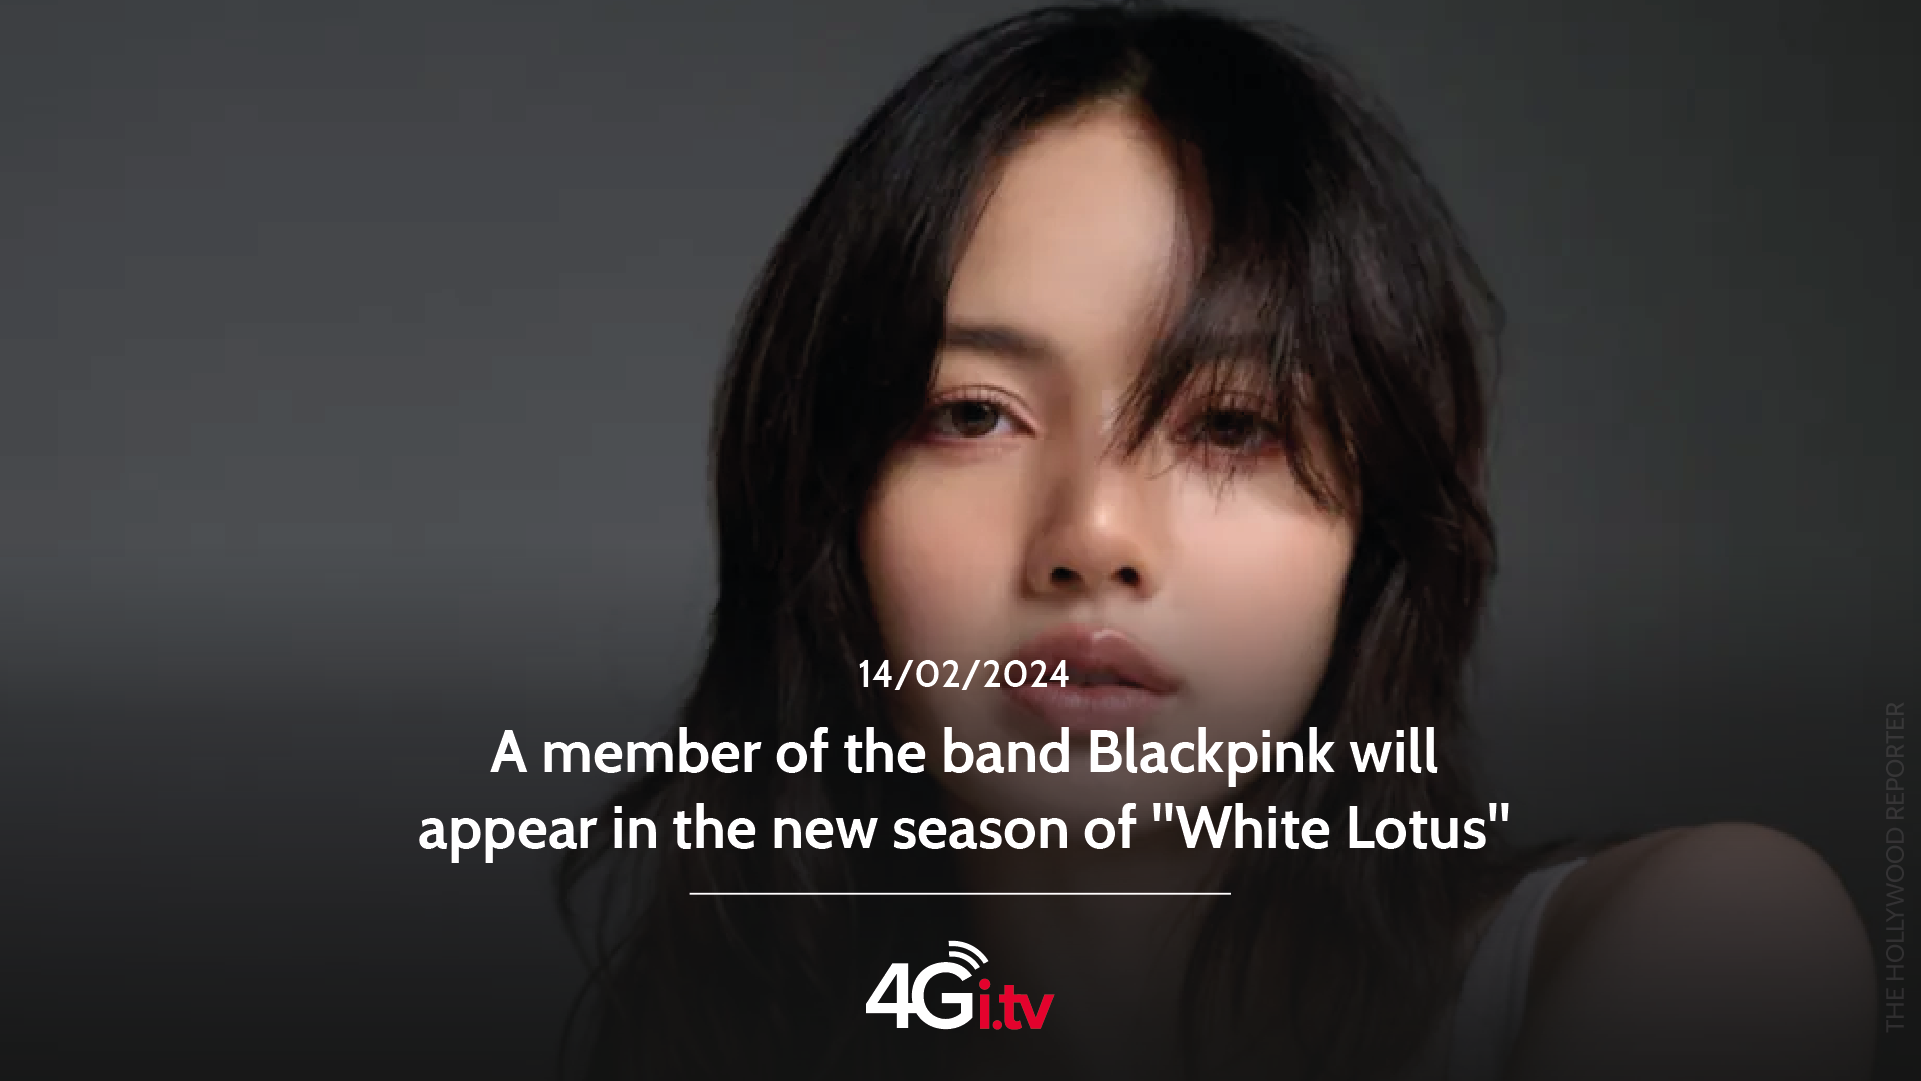 Lesen Sie mehr über den Artikel A member of the band Blackpink will appear in the new season of “White Lotus” 